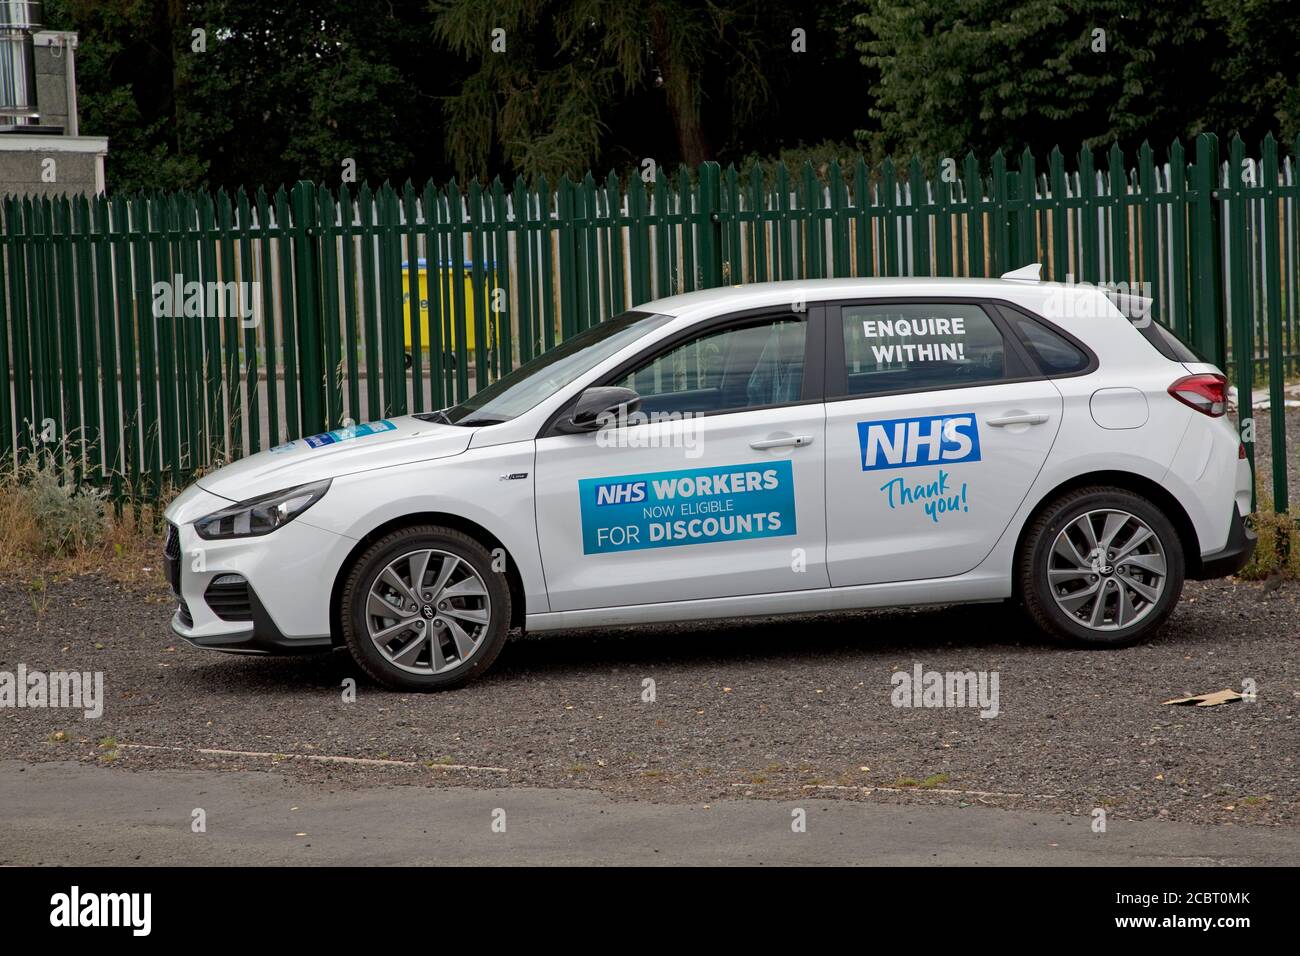 NHS thankyou sign on new cars for sale with discounts to NHS workers, Warwick, UKd Stock Photo